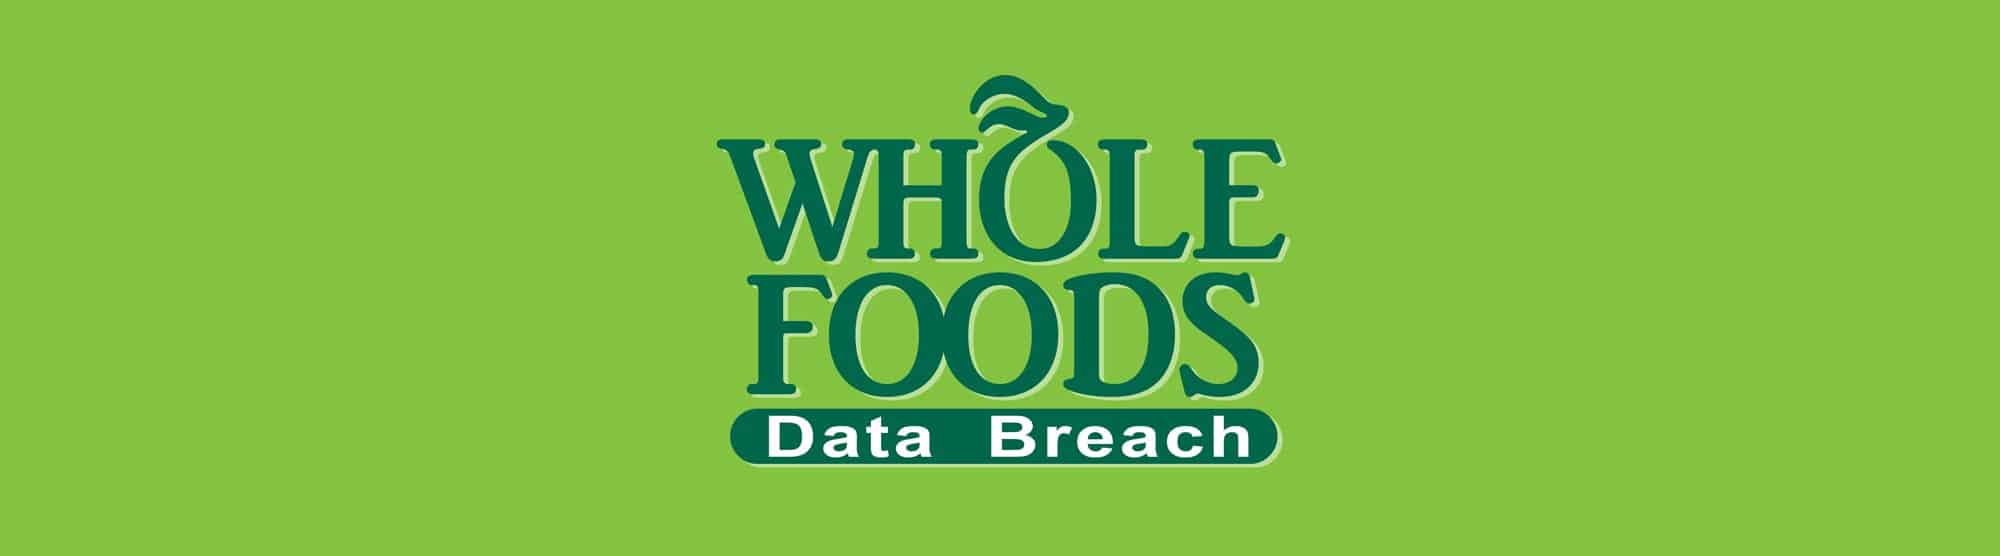 Whole Foods Data Breach